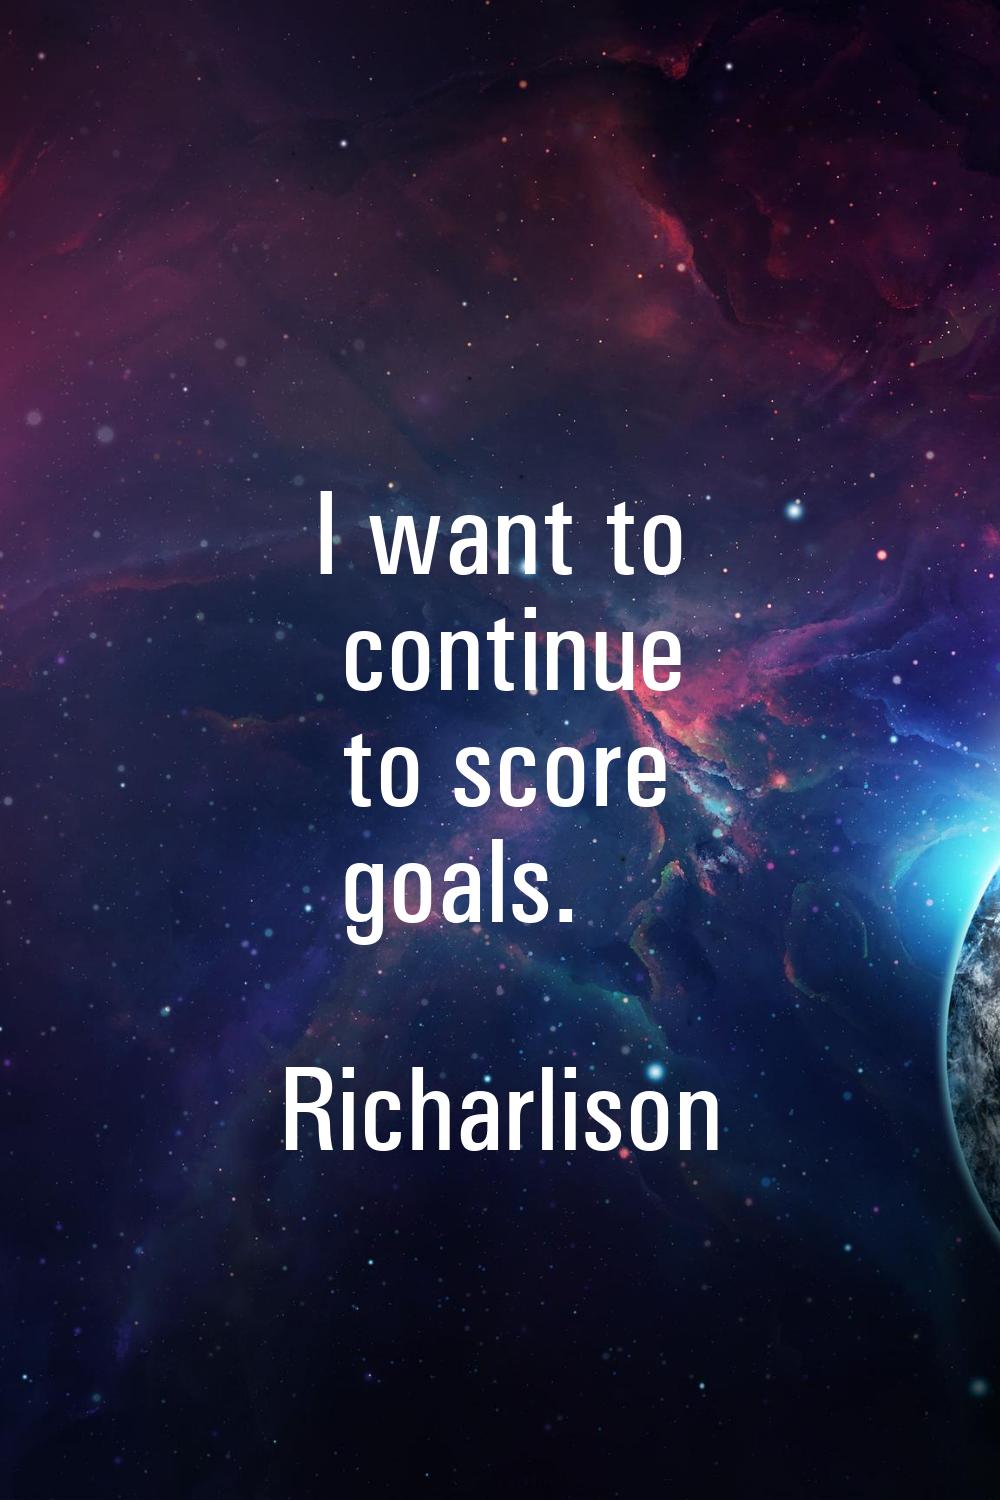 I want to continue to score goals.